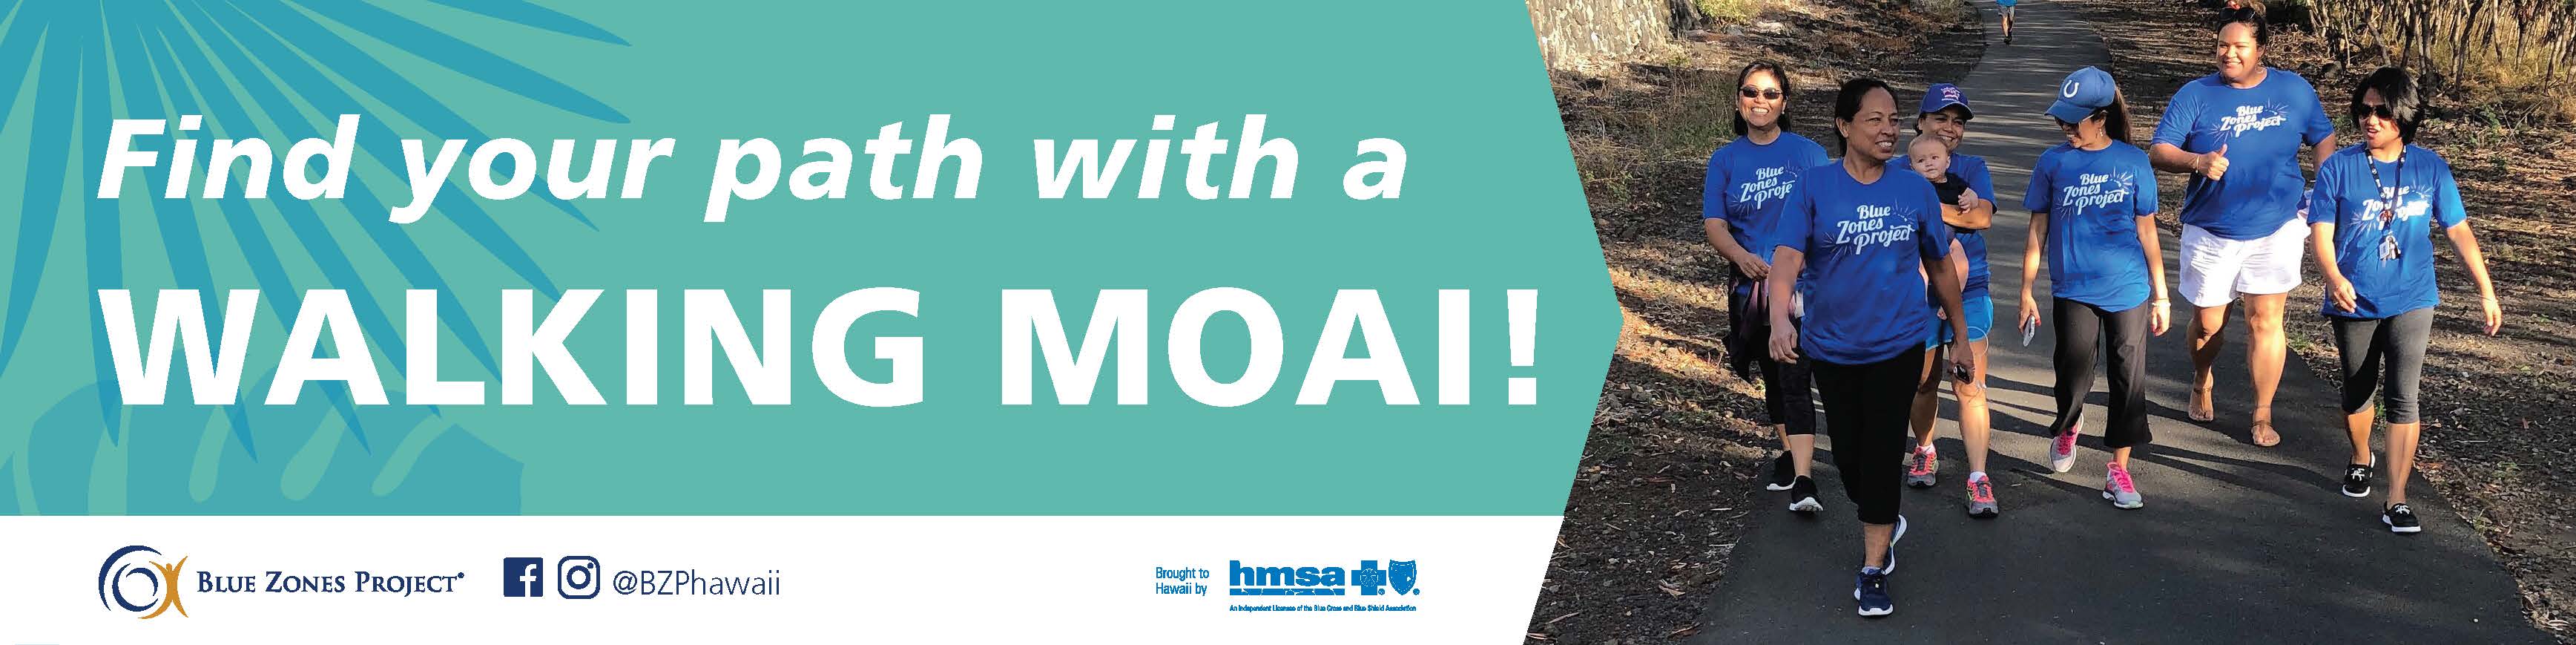 Find Your Path With a Walking Moai